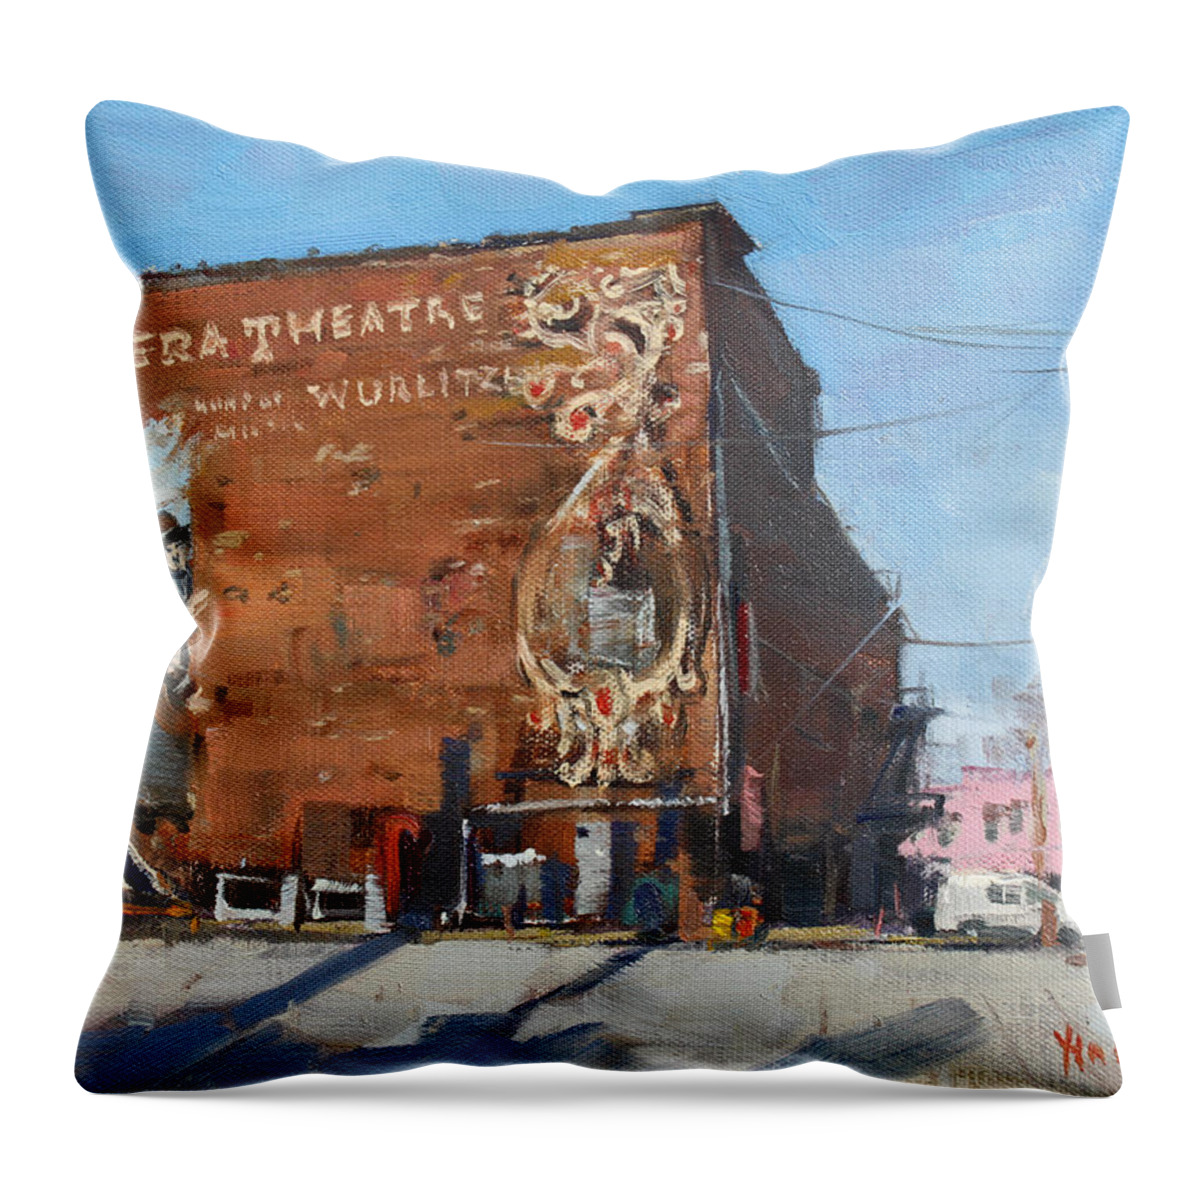 Riviera Theatre Throw Pillow featuring the painting Riviera Theatre Historic Place in North Tonawanda by Ylli Haruni